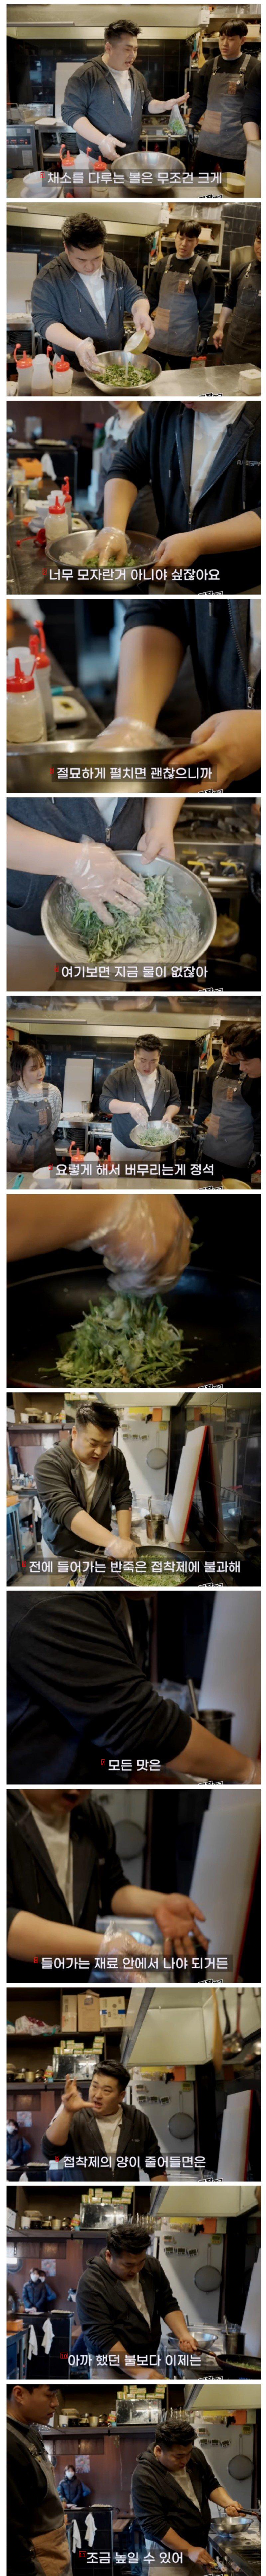 Chef Lee Wonil says there should be no water in the dough when frying.jpg